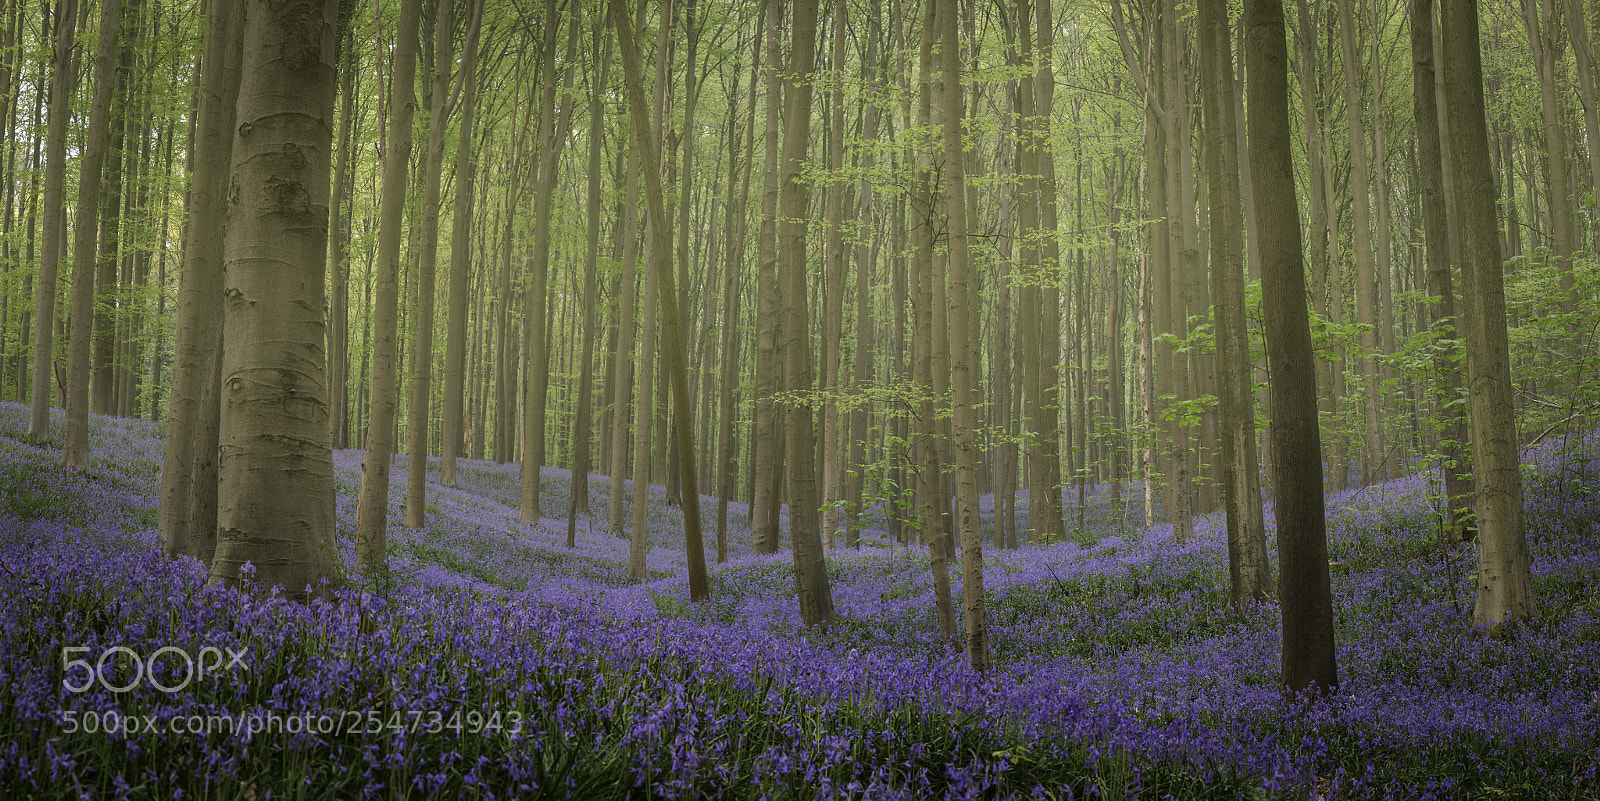 Sony a6300 sample photo. Bluebells photography